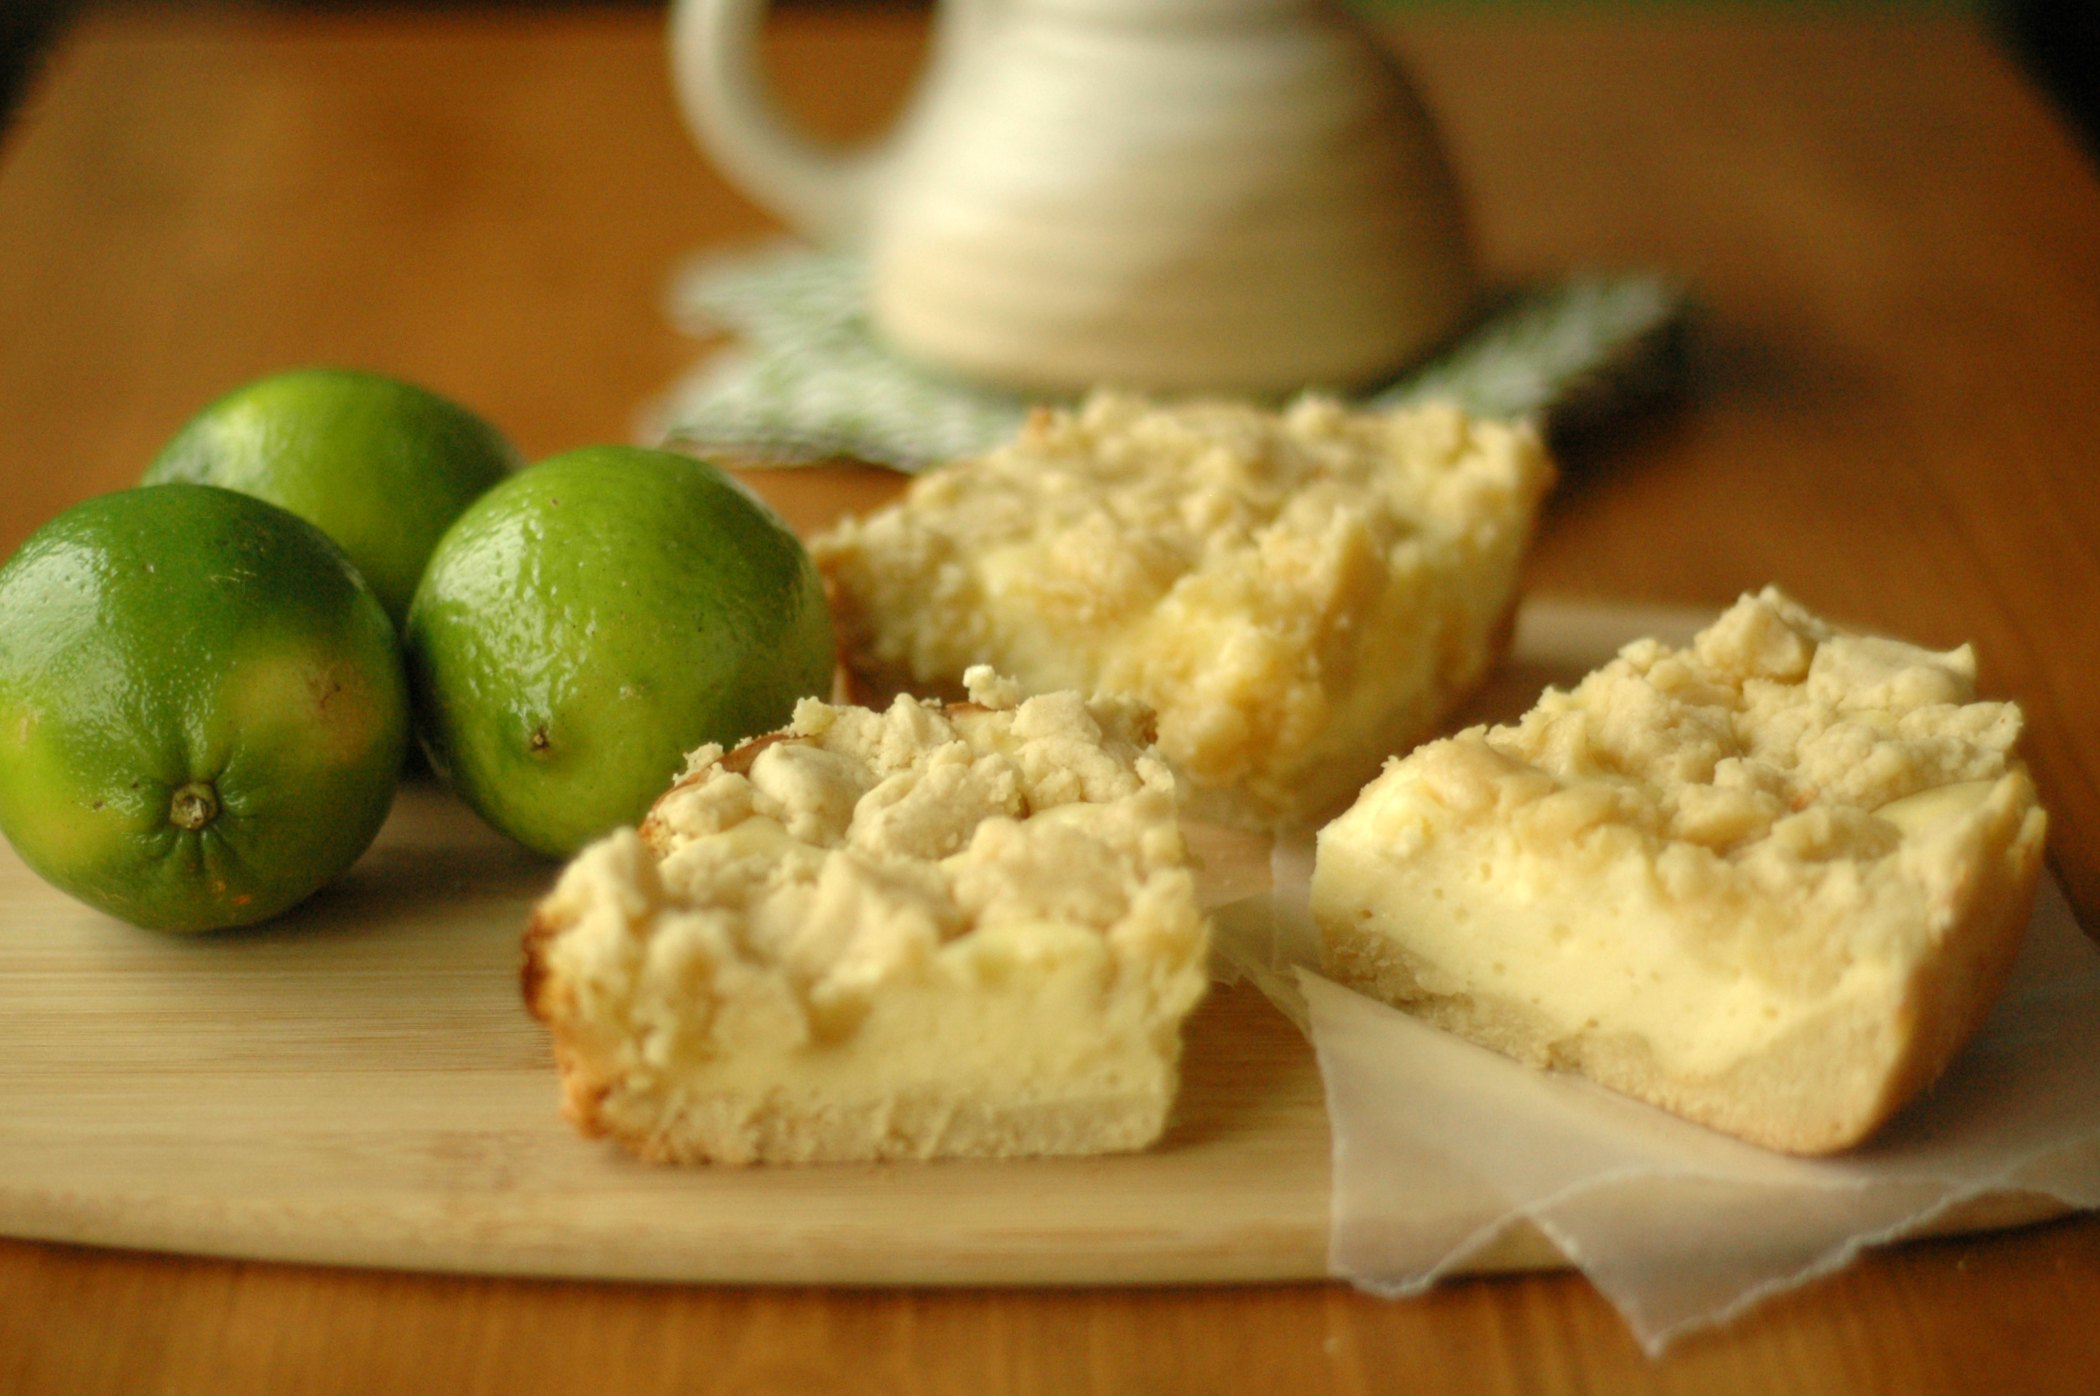 Cheesecake Cookie Bars on cutting board with three whole limes